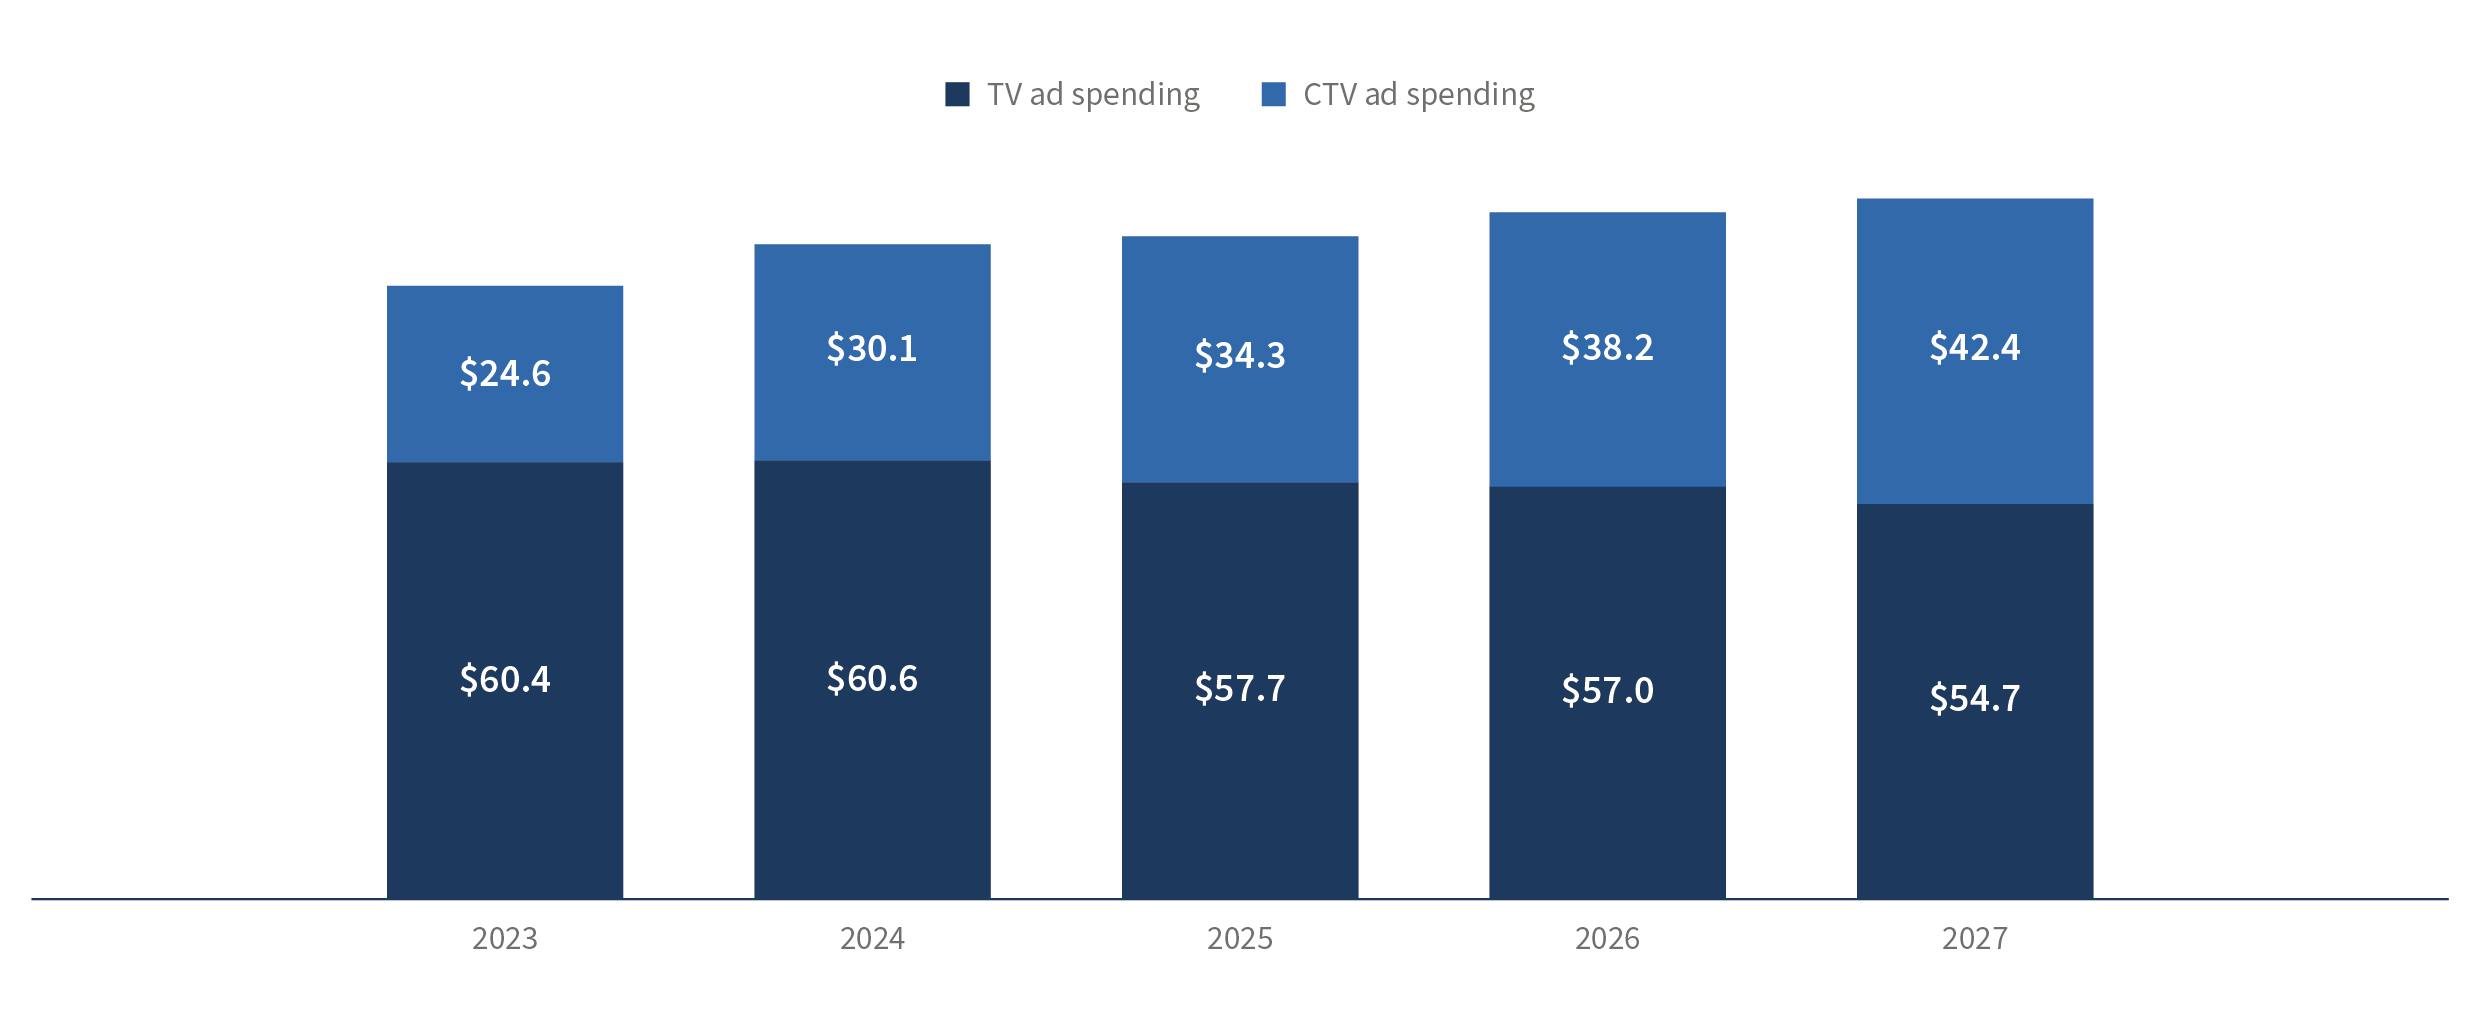 U.S. tv and connected TV (CTV) ad spending, 2023-2027
Billions